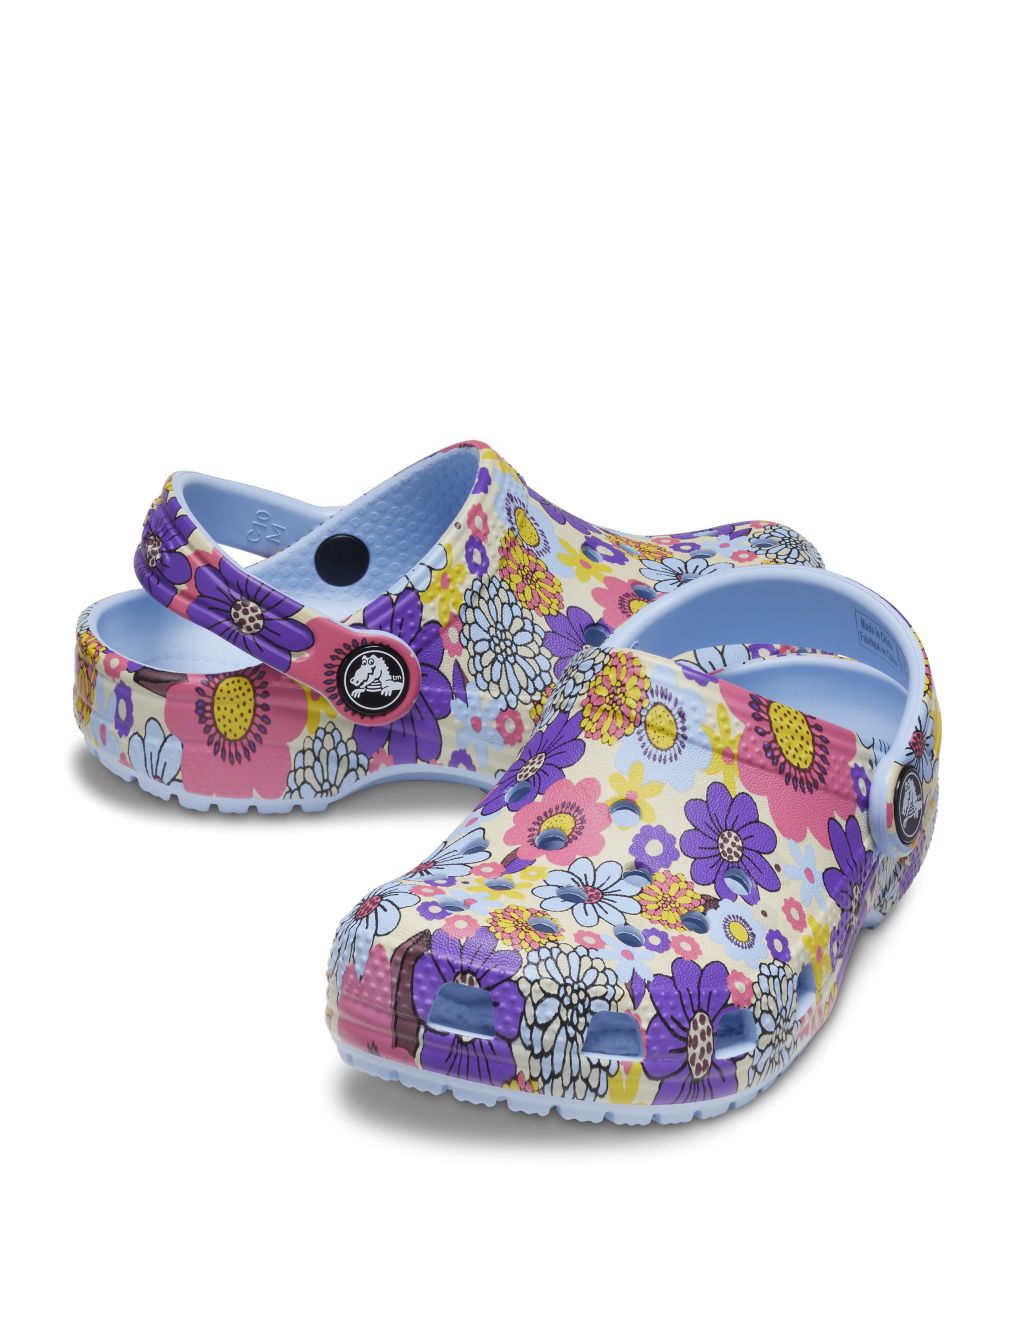 Kids' Classic Retro Floral Clogs (11 Small - 6 Large) image 3